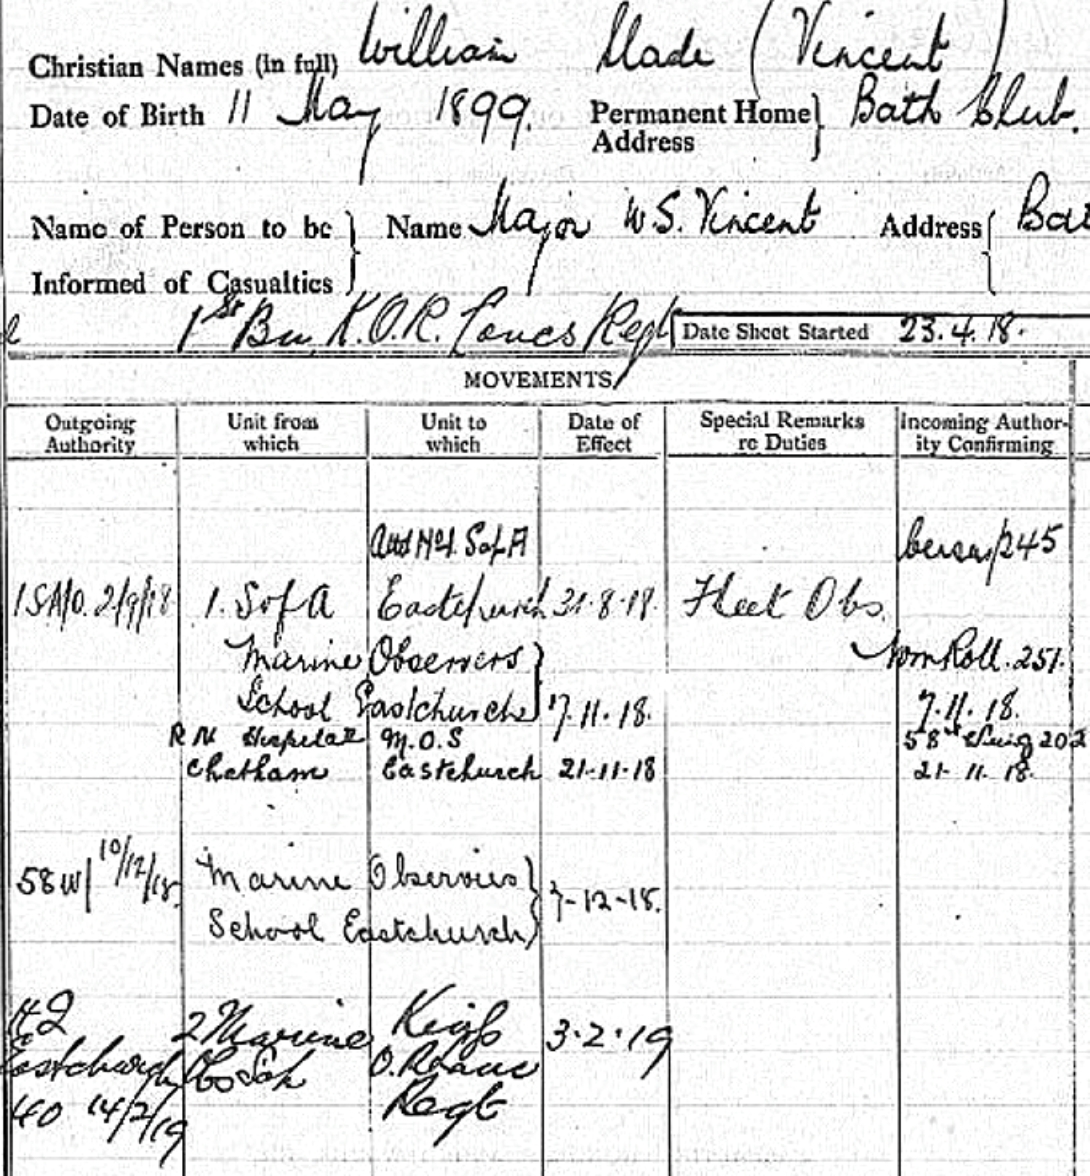 William’s Record of Service at Eastchurch